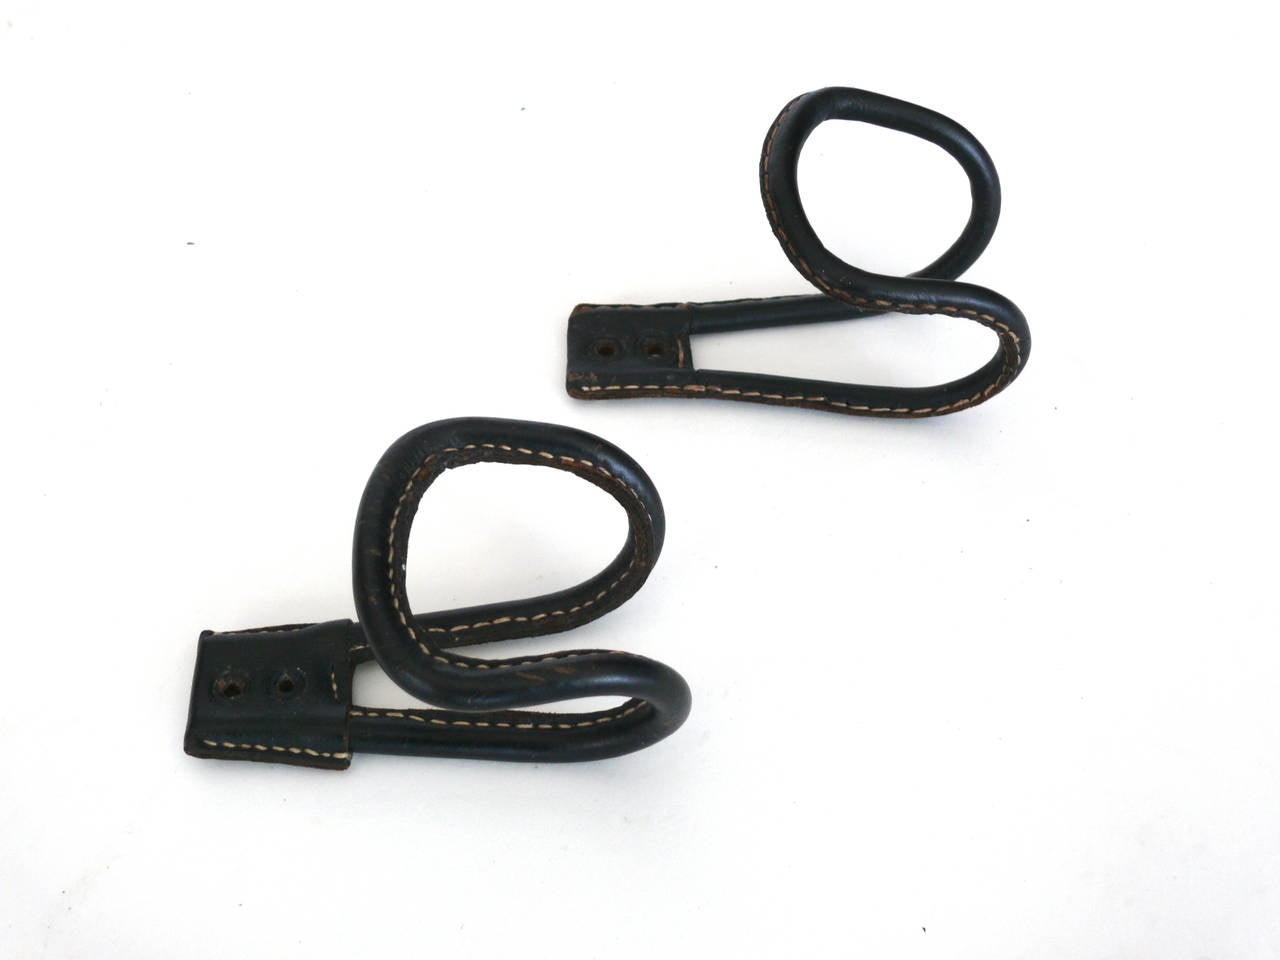 Single black leather coat hooks by Jacques Adnet with signature contrast stitching on black iron loop. Two available.